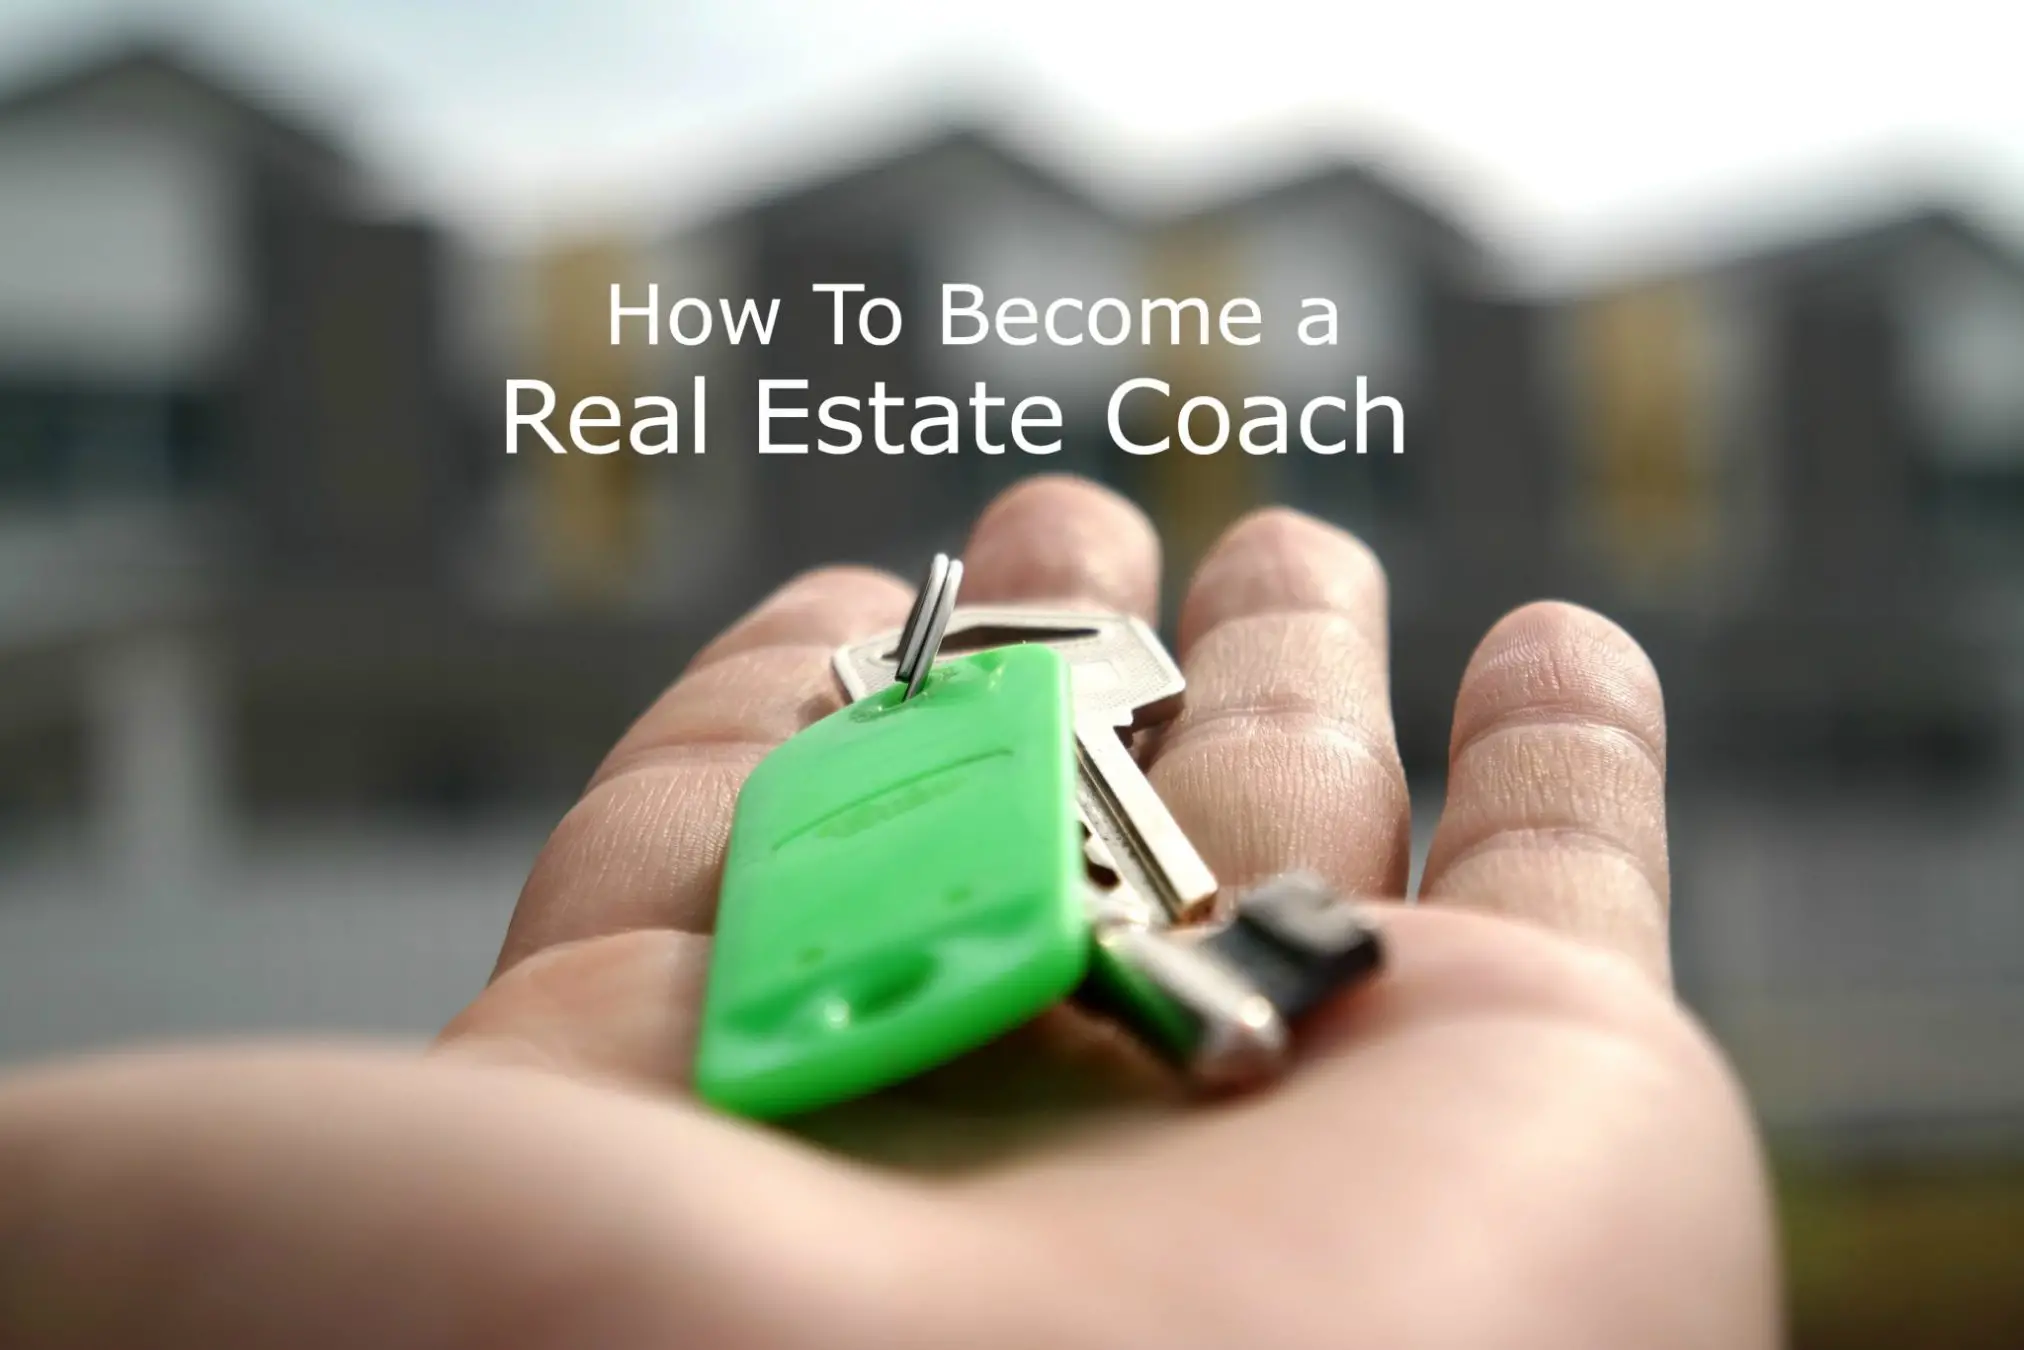 How To Become a Real Estate Coach coaching business model